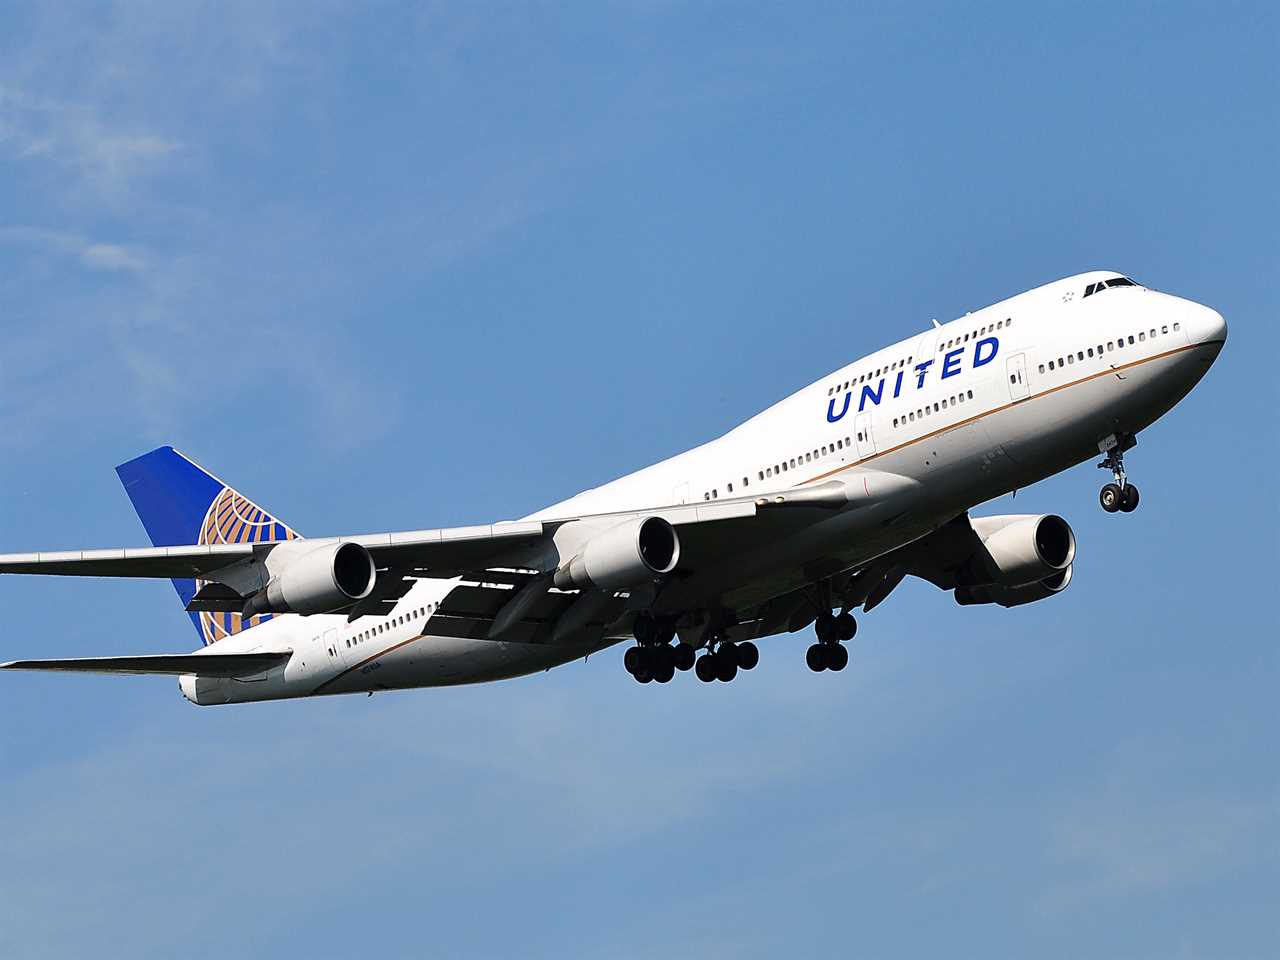 United Airlines 747.